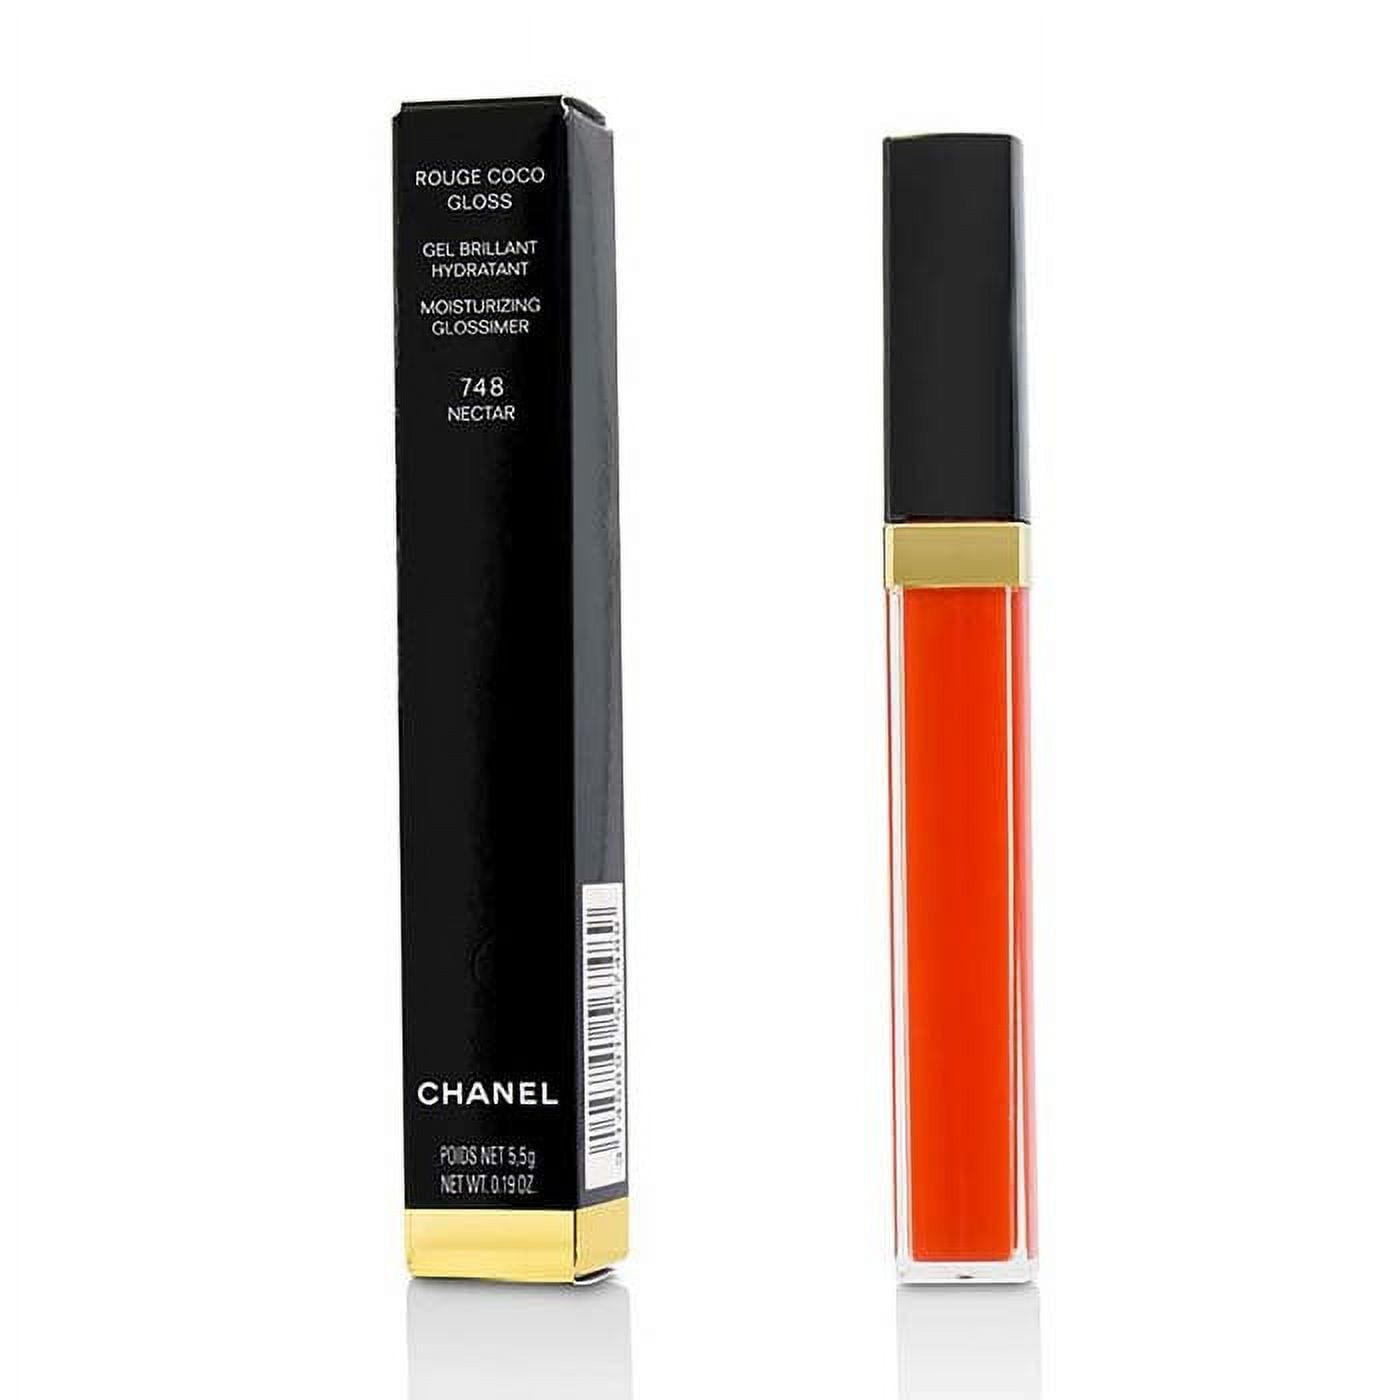 CHANEL, Makeup, Chanel Rouge Coco Gloss Icing